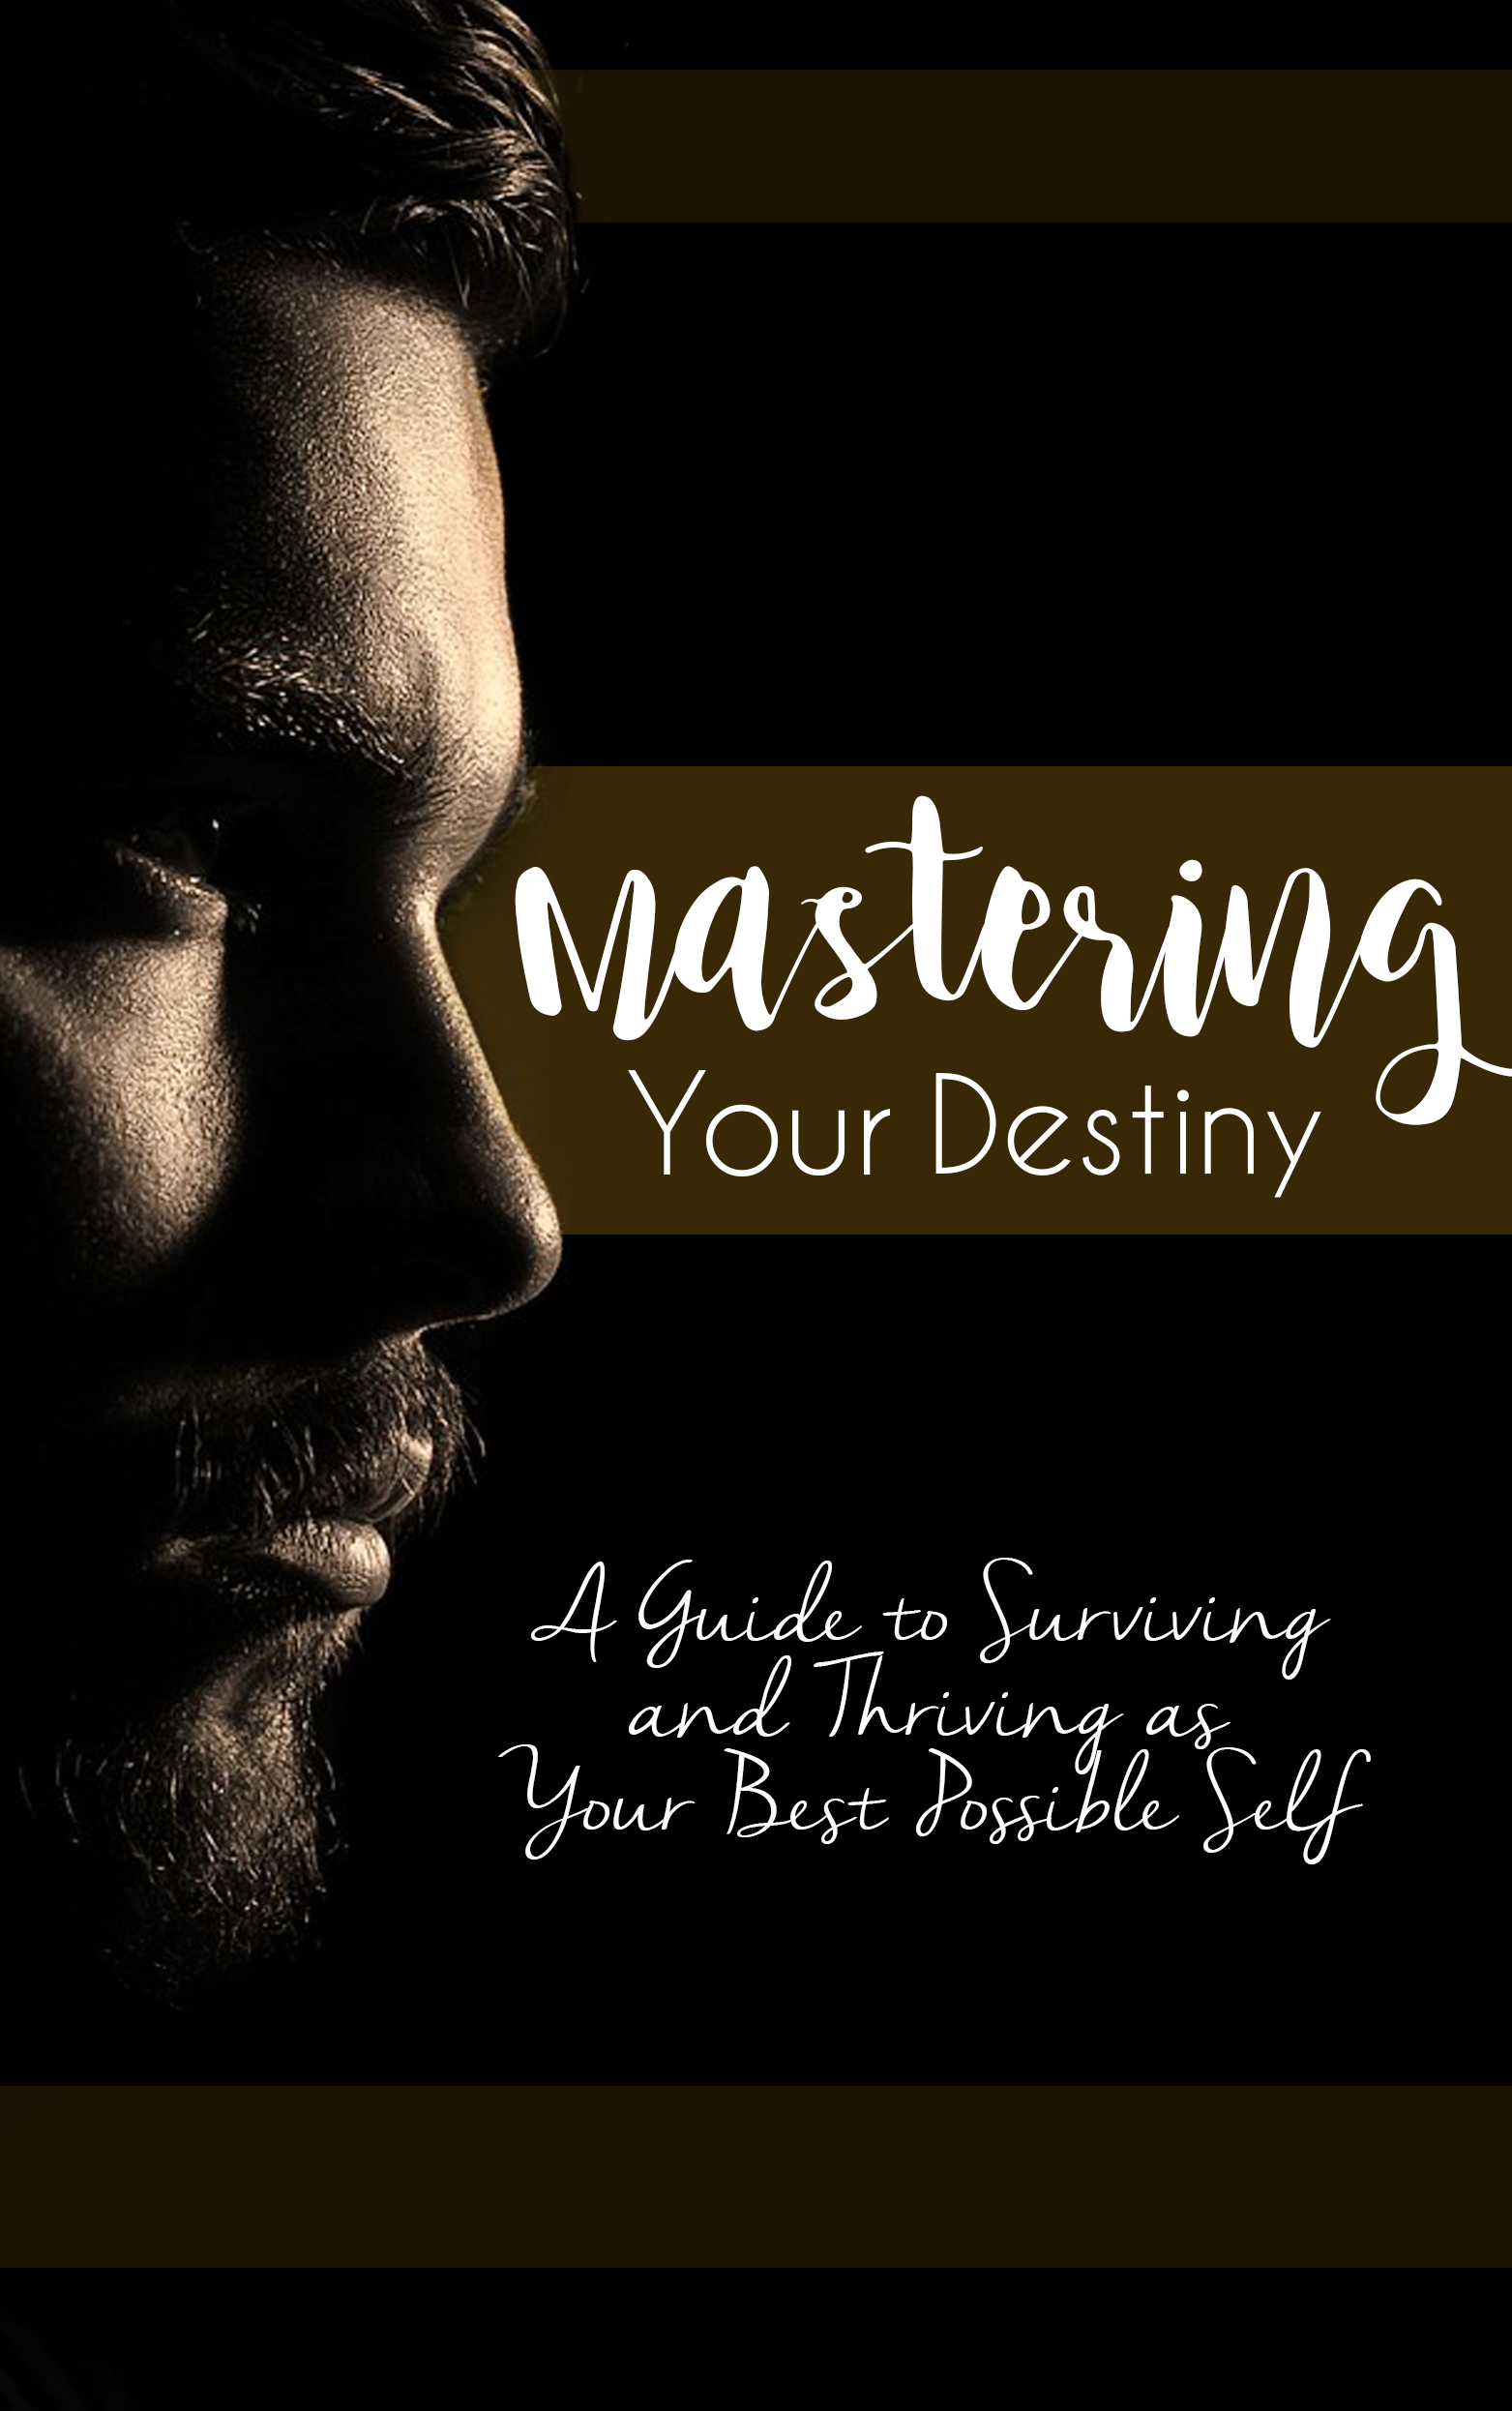 Mastering Your Destiny (A Guide To Surviving And Thriving As Your Best Possible Self) Ebook's Book Image